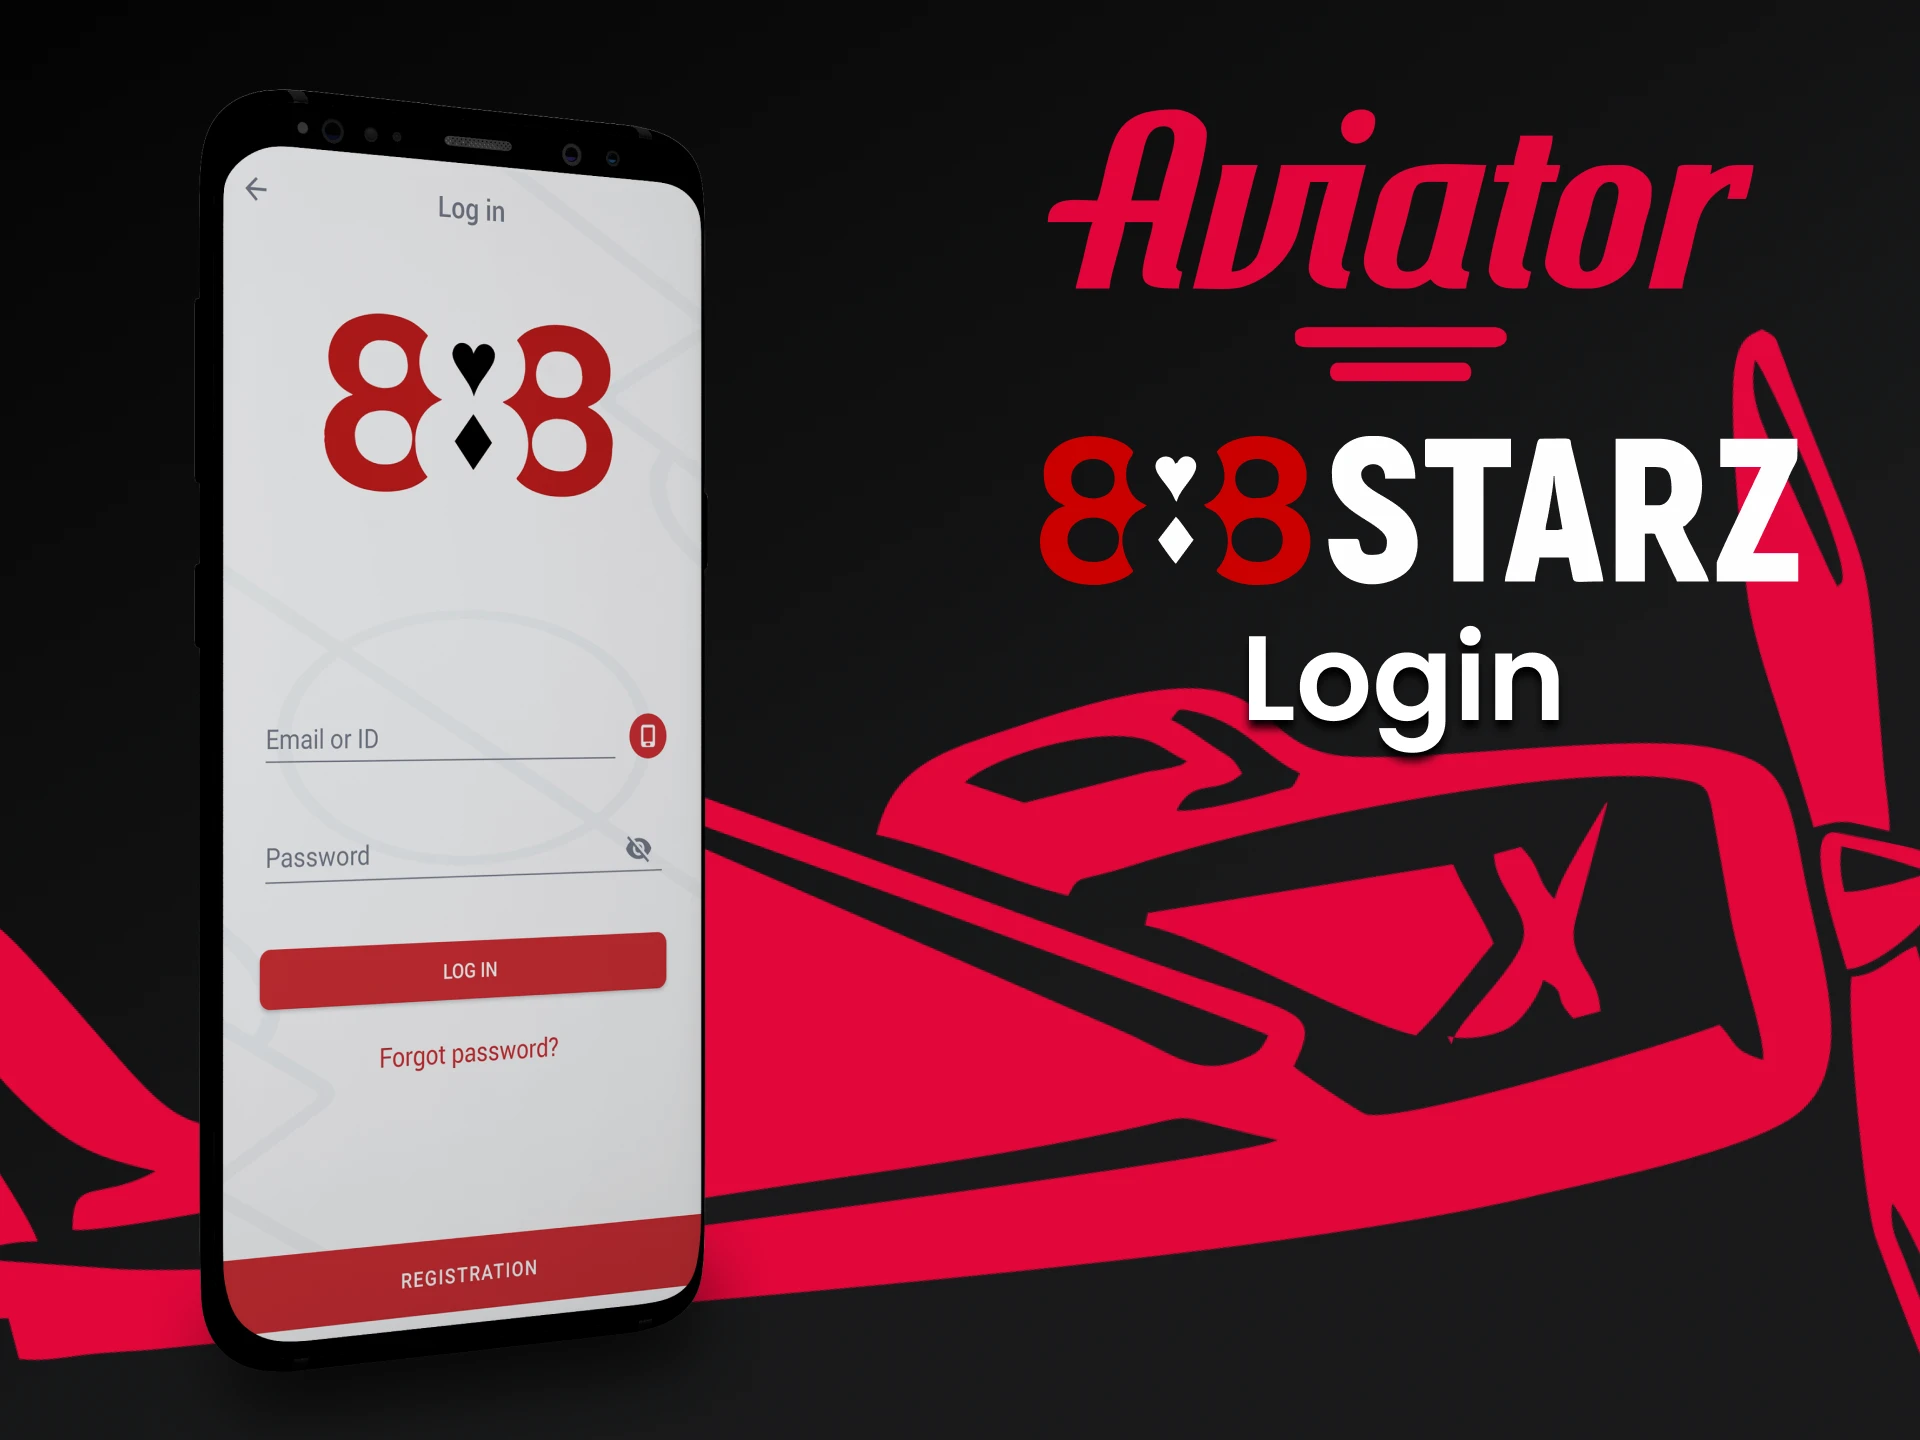 Log in to your account through the 888starz app.